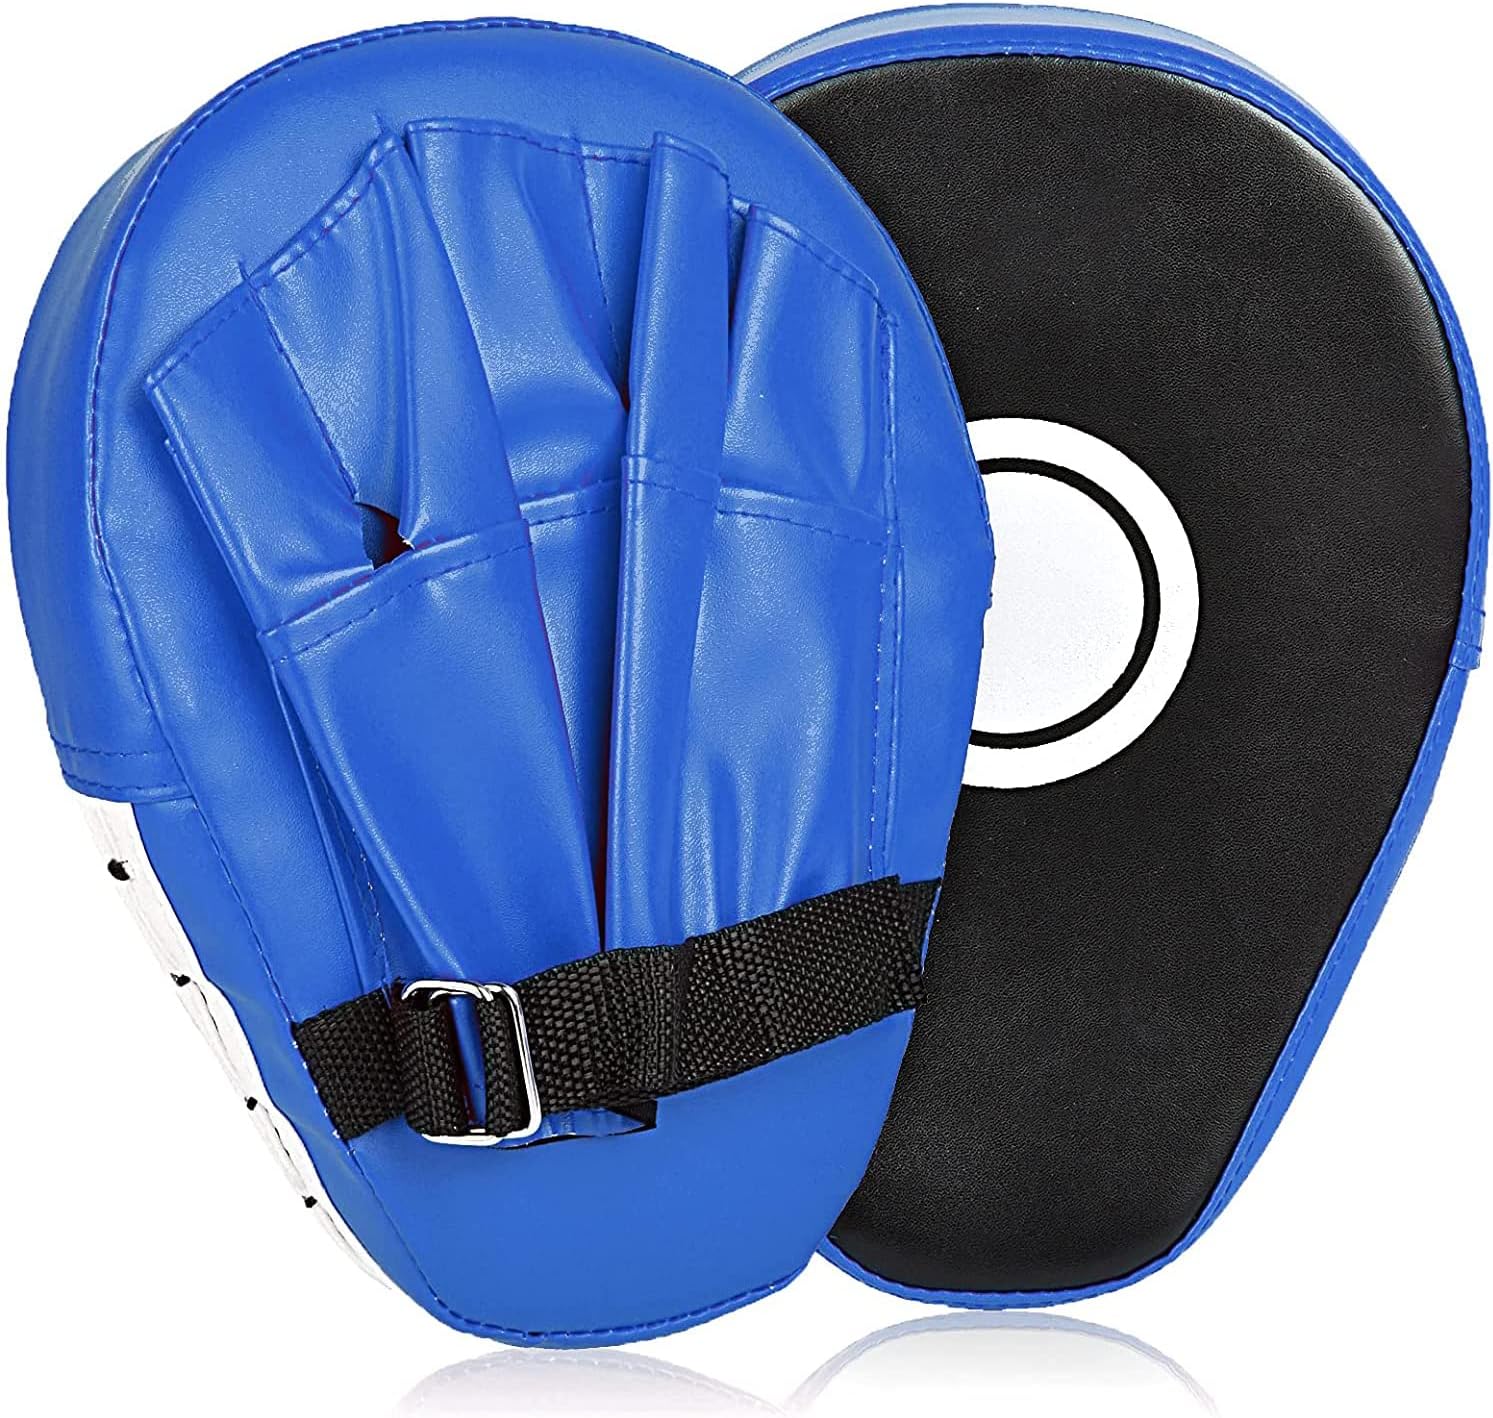 Arabest Boxing Pads - 2PCS Boxing Mitts, Curved Focus Punching Mitts, Training Boxing Target Pad for Kids and Adults, Focus Pads for Kickboxing, Karate, Muay Thai Kick, Dojo, Martial Arts